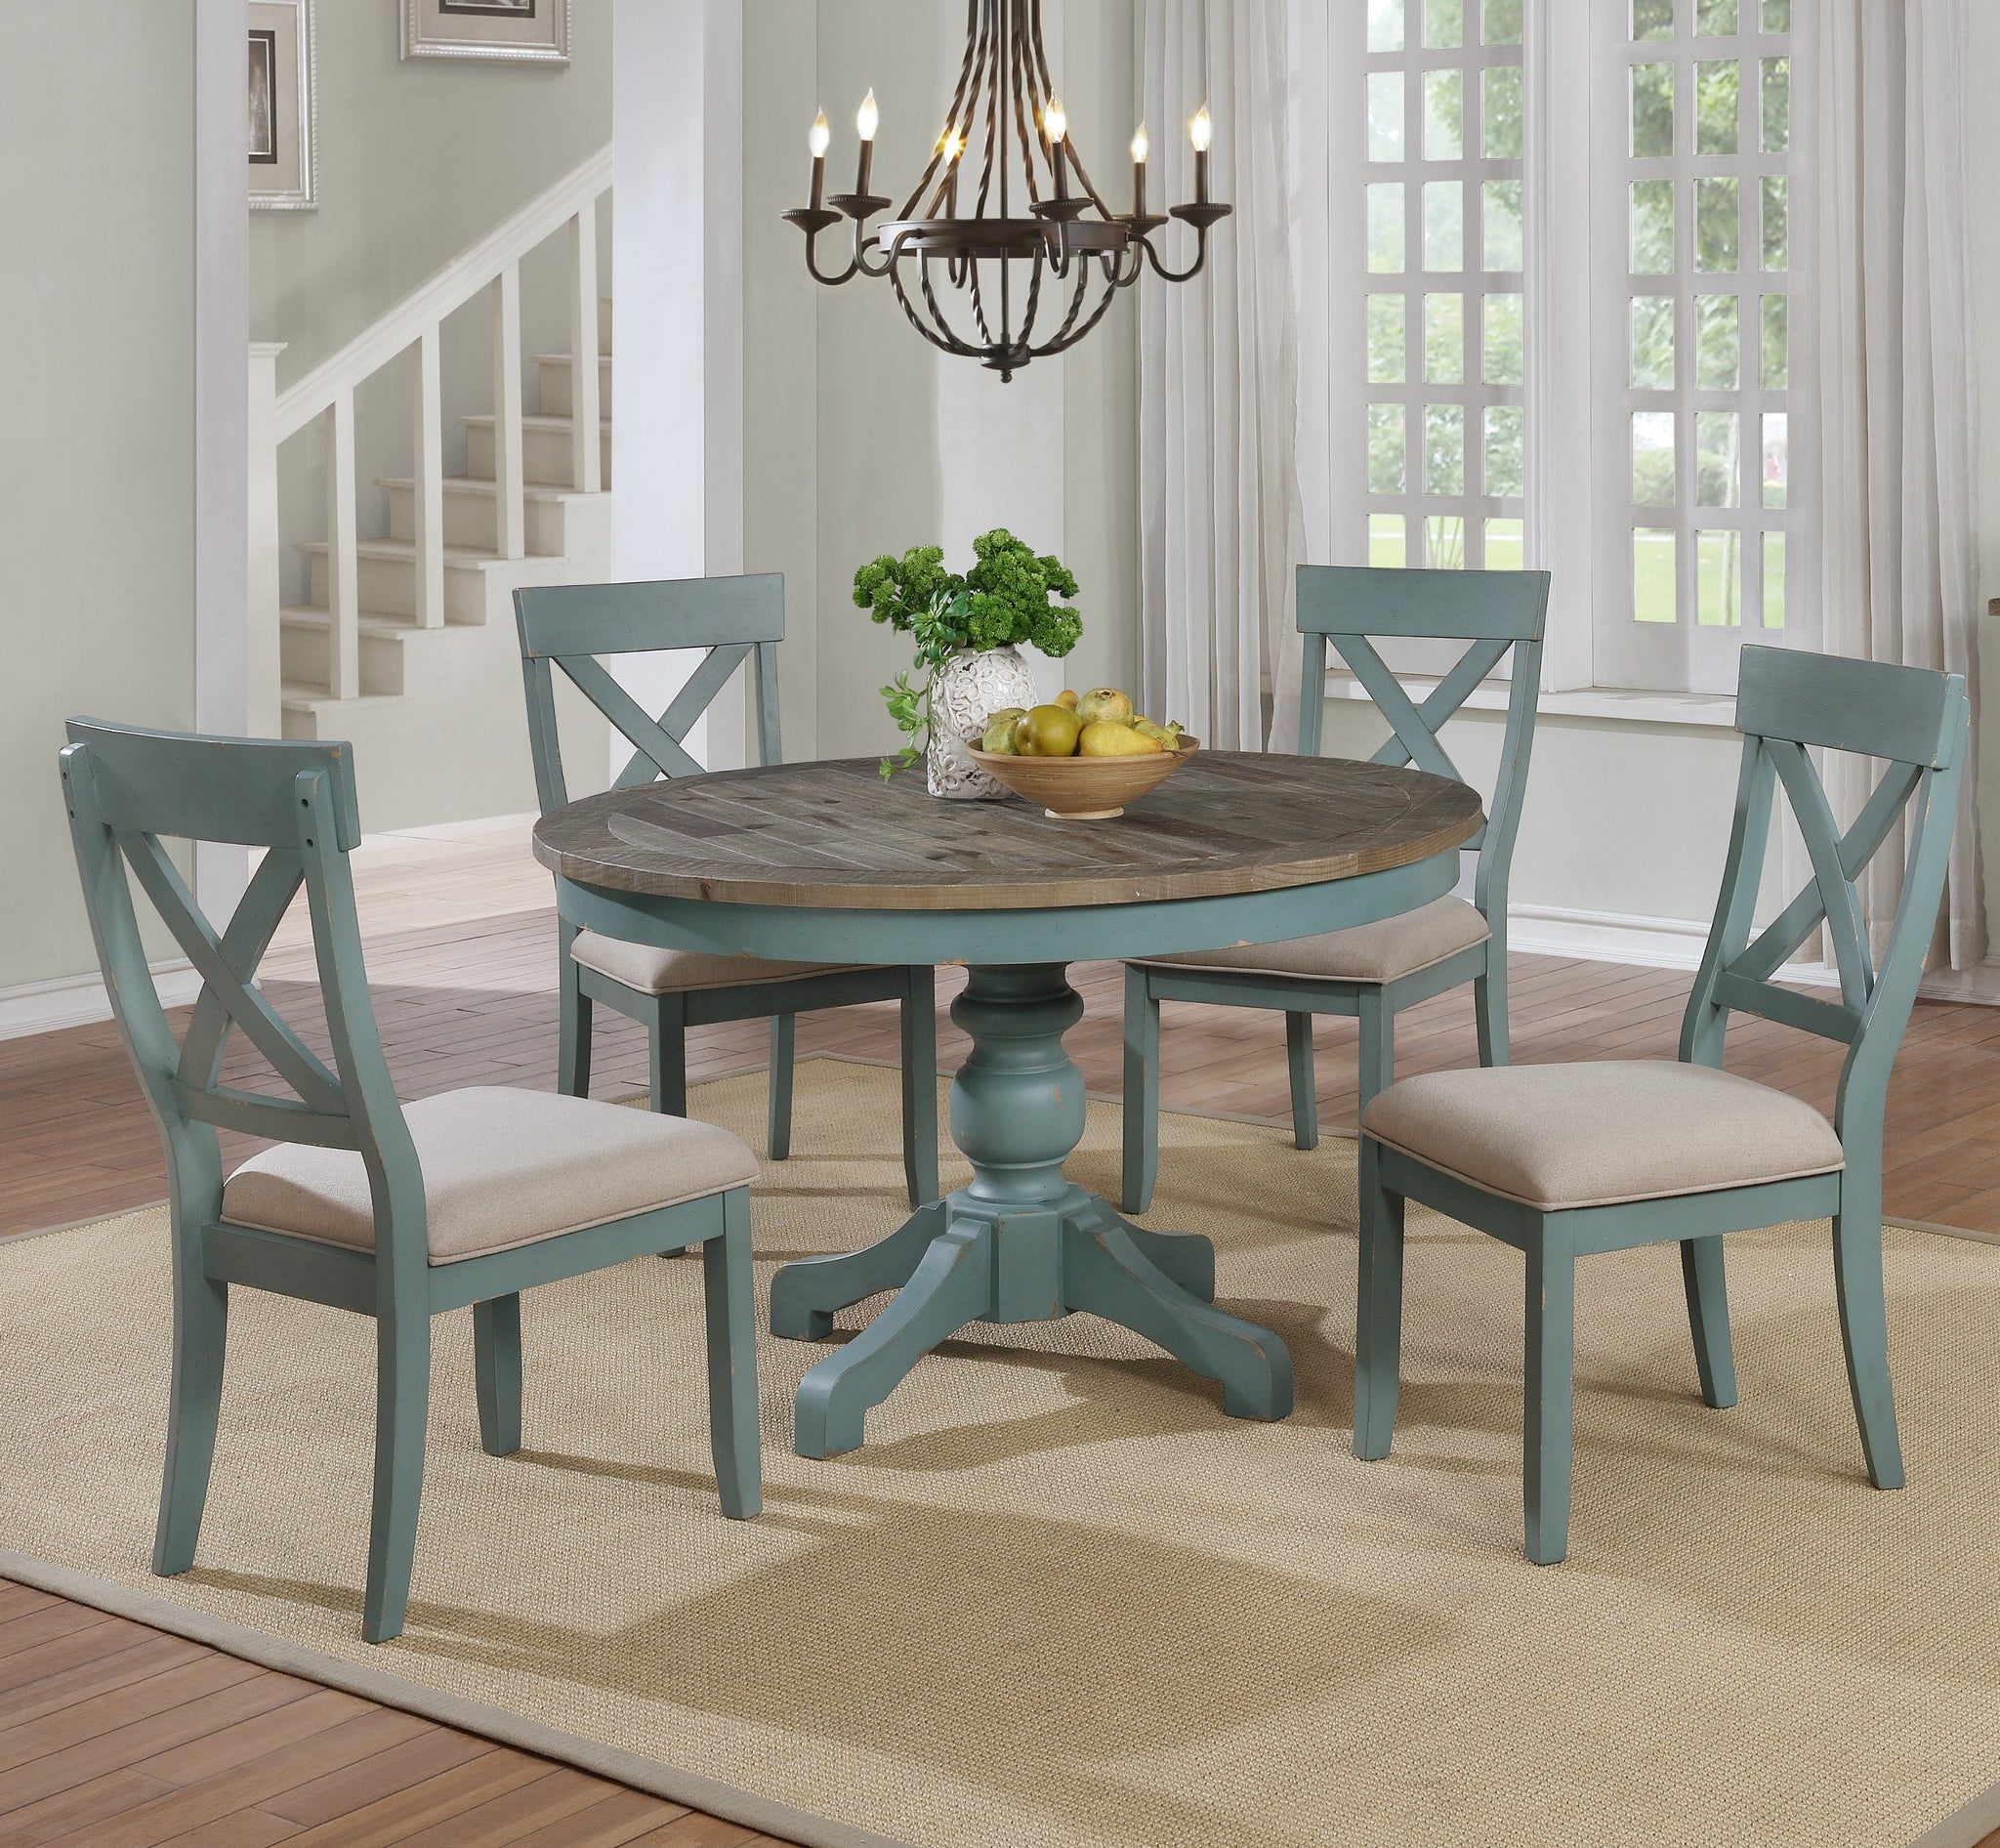 Inexpensive Round Dining Table Sets : Hillsdale Wilshire 5 Piece Round ...